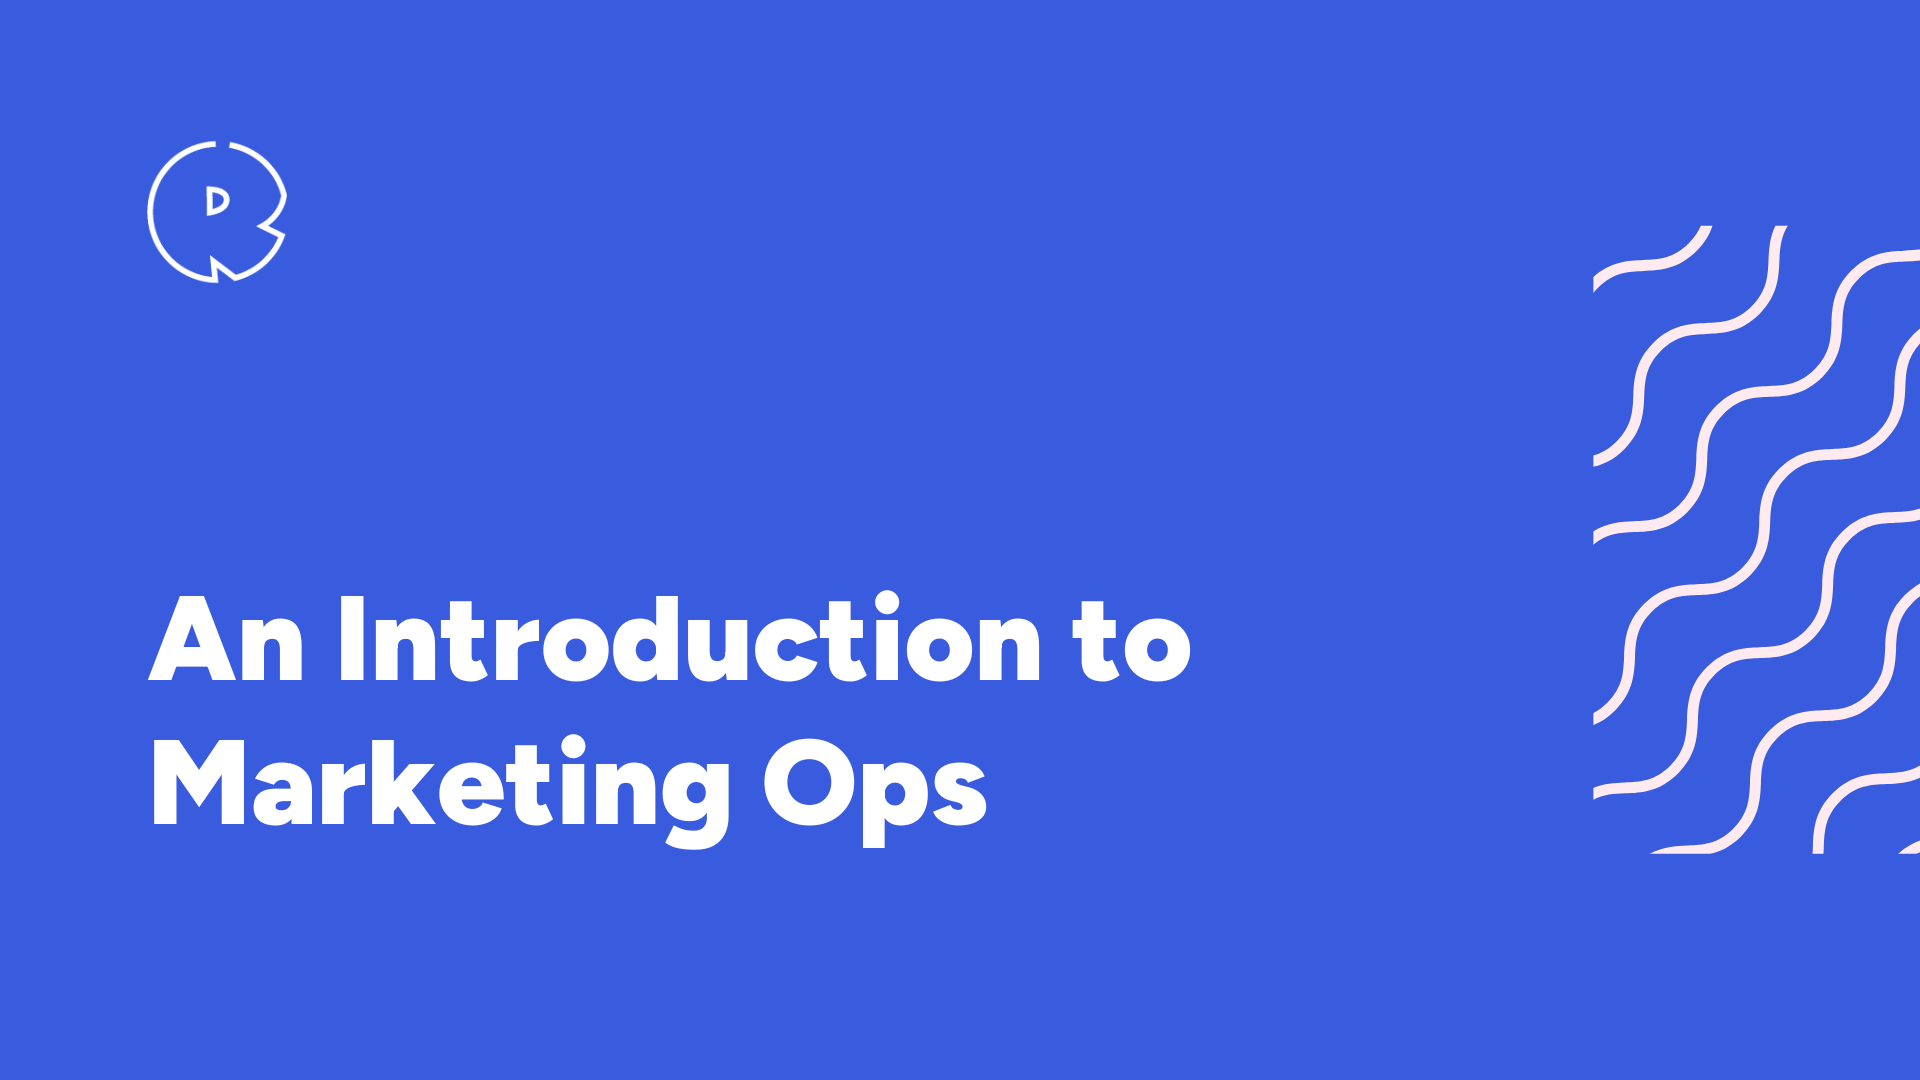 An Introduction to Marketing Ops